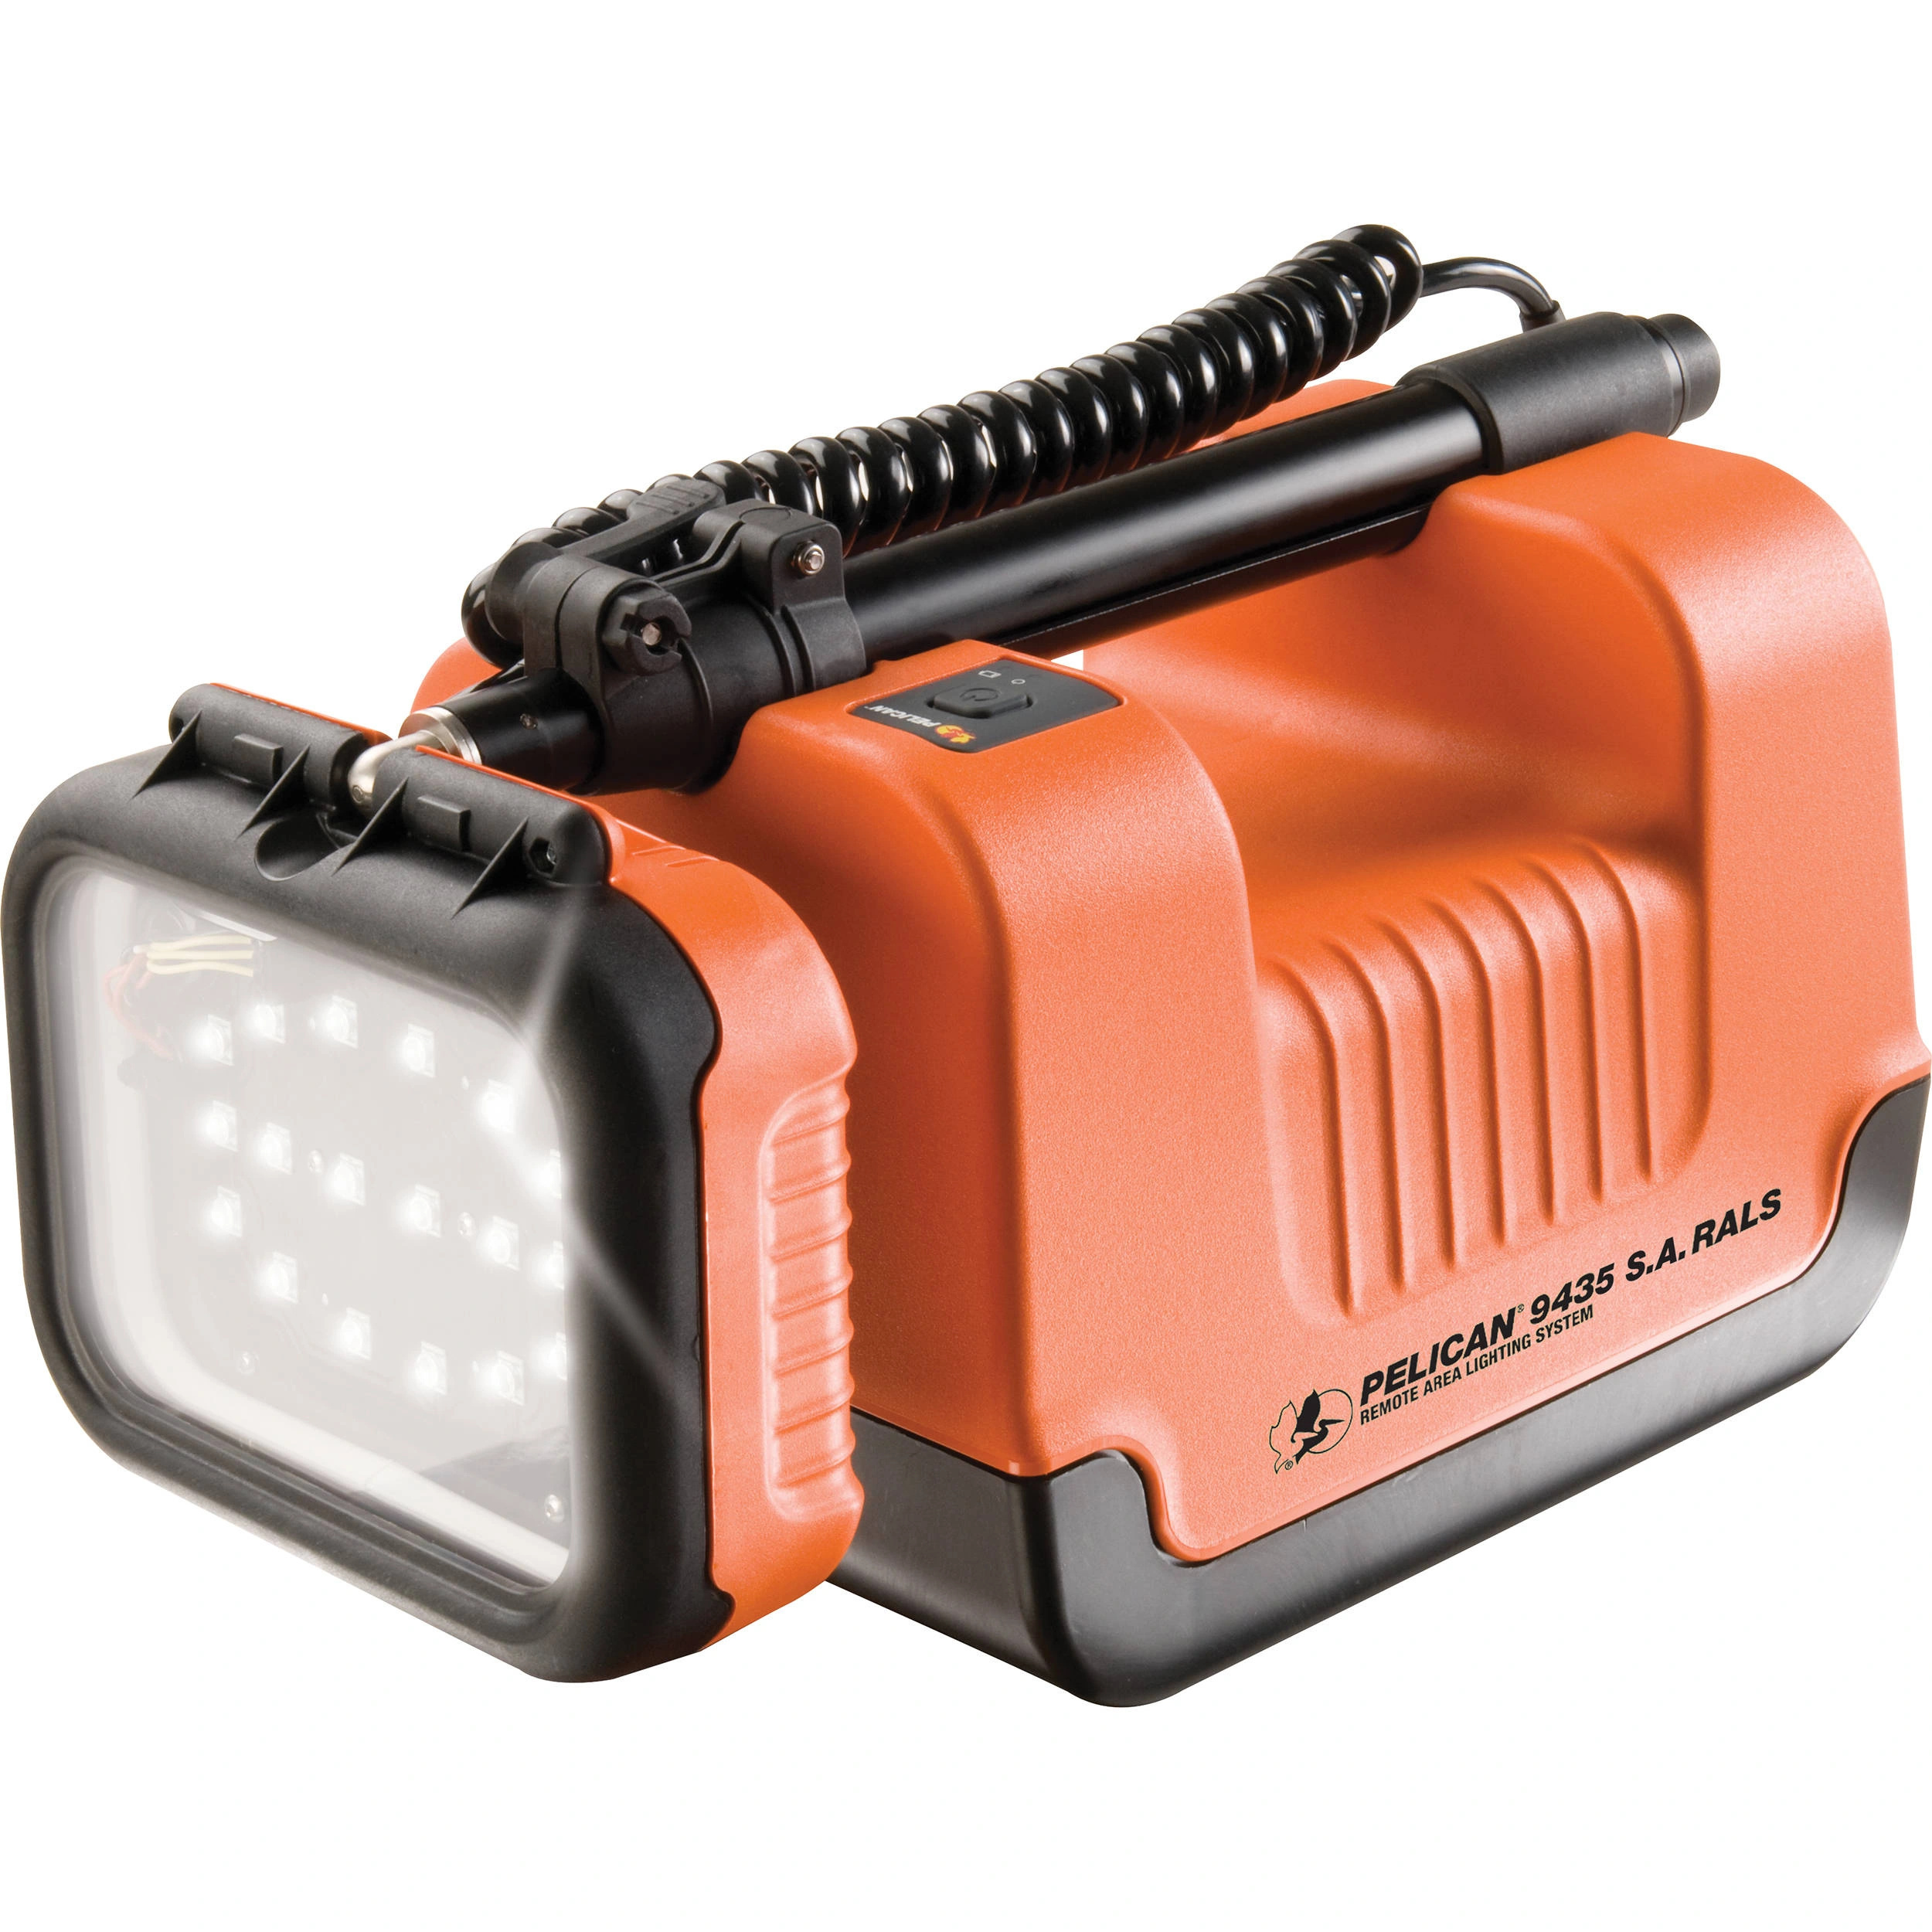 Pelican 9435 Safety Approved Remote Area Lighting System - Orange - Open Box Special